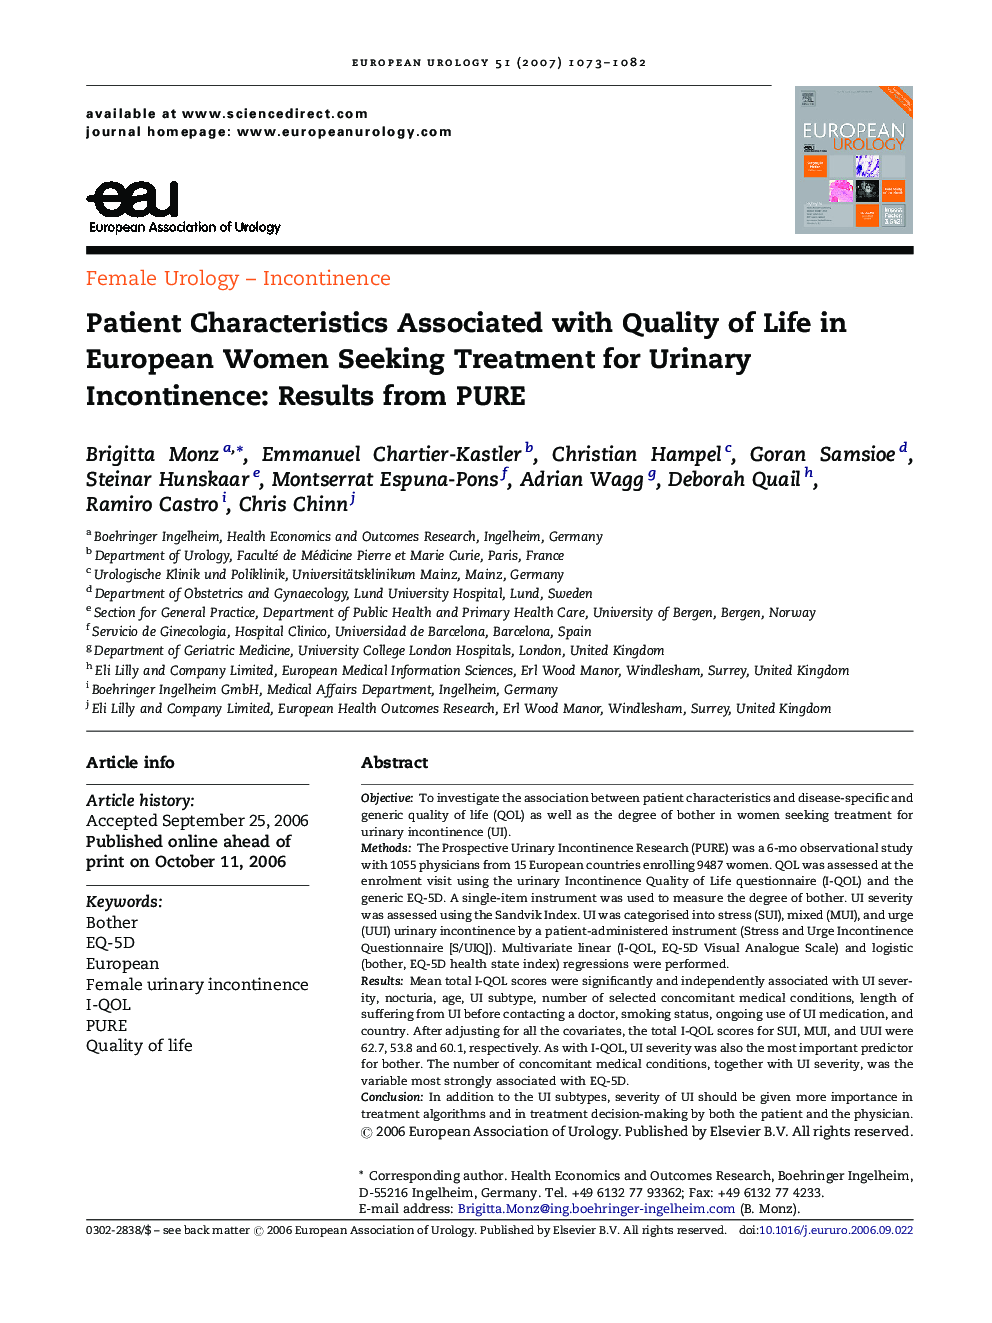 Patient Characteristics Associated with Quality of Life in European Women Seeking Treatment for Urinary Incontinence: Results from PURE